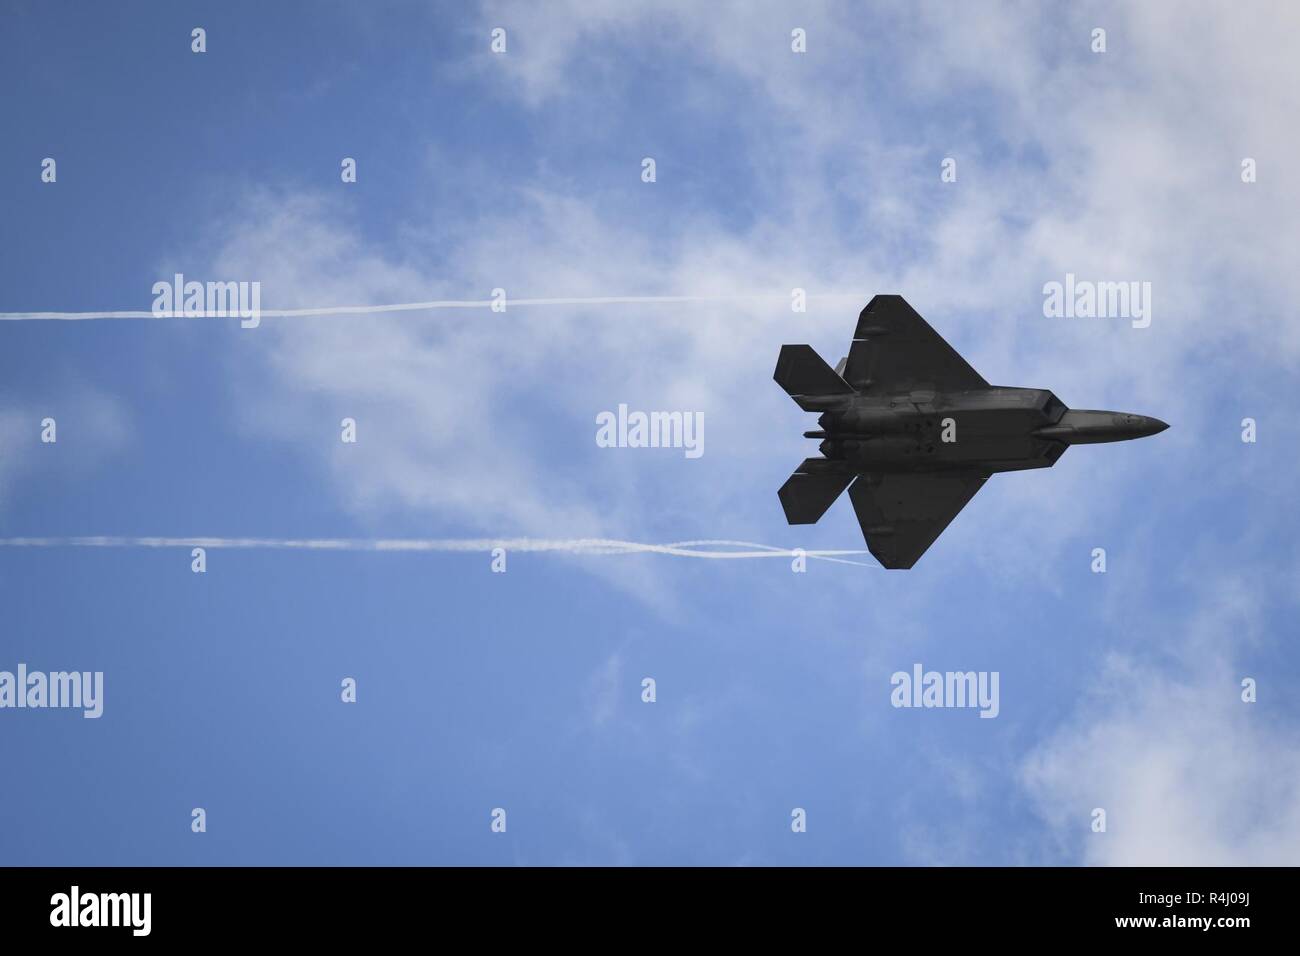 An F-22 Raptor from the Air Combat Commands Raptor Demonstration Team performs a flyover during an aerial demonstration at the U.S. Air Force Master Sgt. John A. Chapman Medal of Honor celebration at Hurlburt Field, Florida, Oct. 26, 2018. During the event, 12 aircraft from across the Air Force participated in an aerial demonstration in honor of Master Sgt. John Chapman, a combat controller who made the ultimate sacrifice during an intense battle in the mountains of Afghanistan. Chapman was posthumously awarded the Medal of Honor on Aug. 22, 2018. Stock Photo